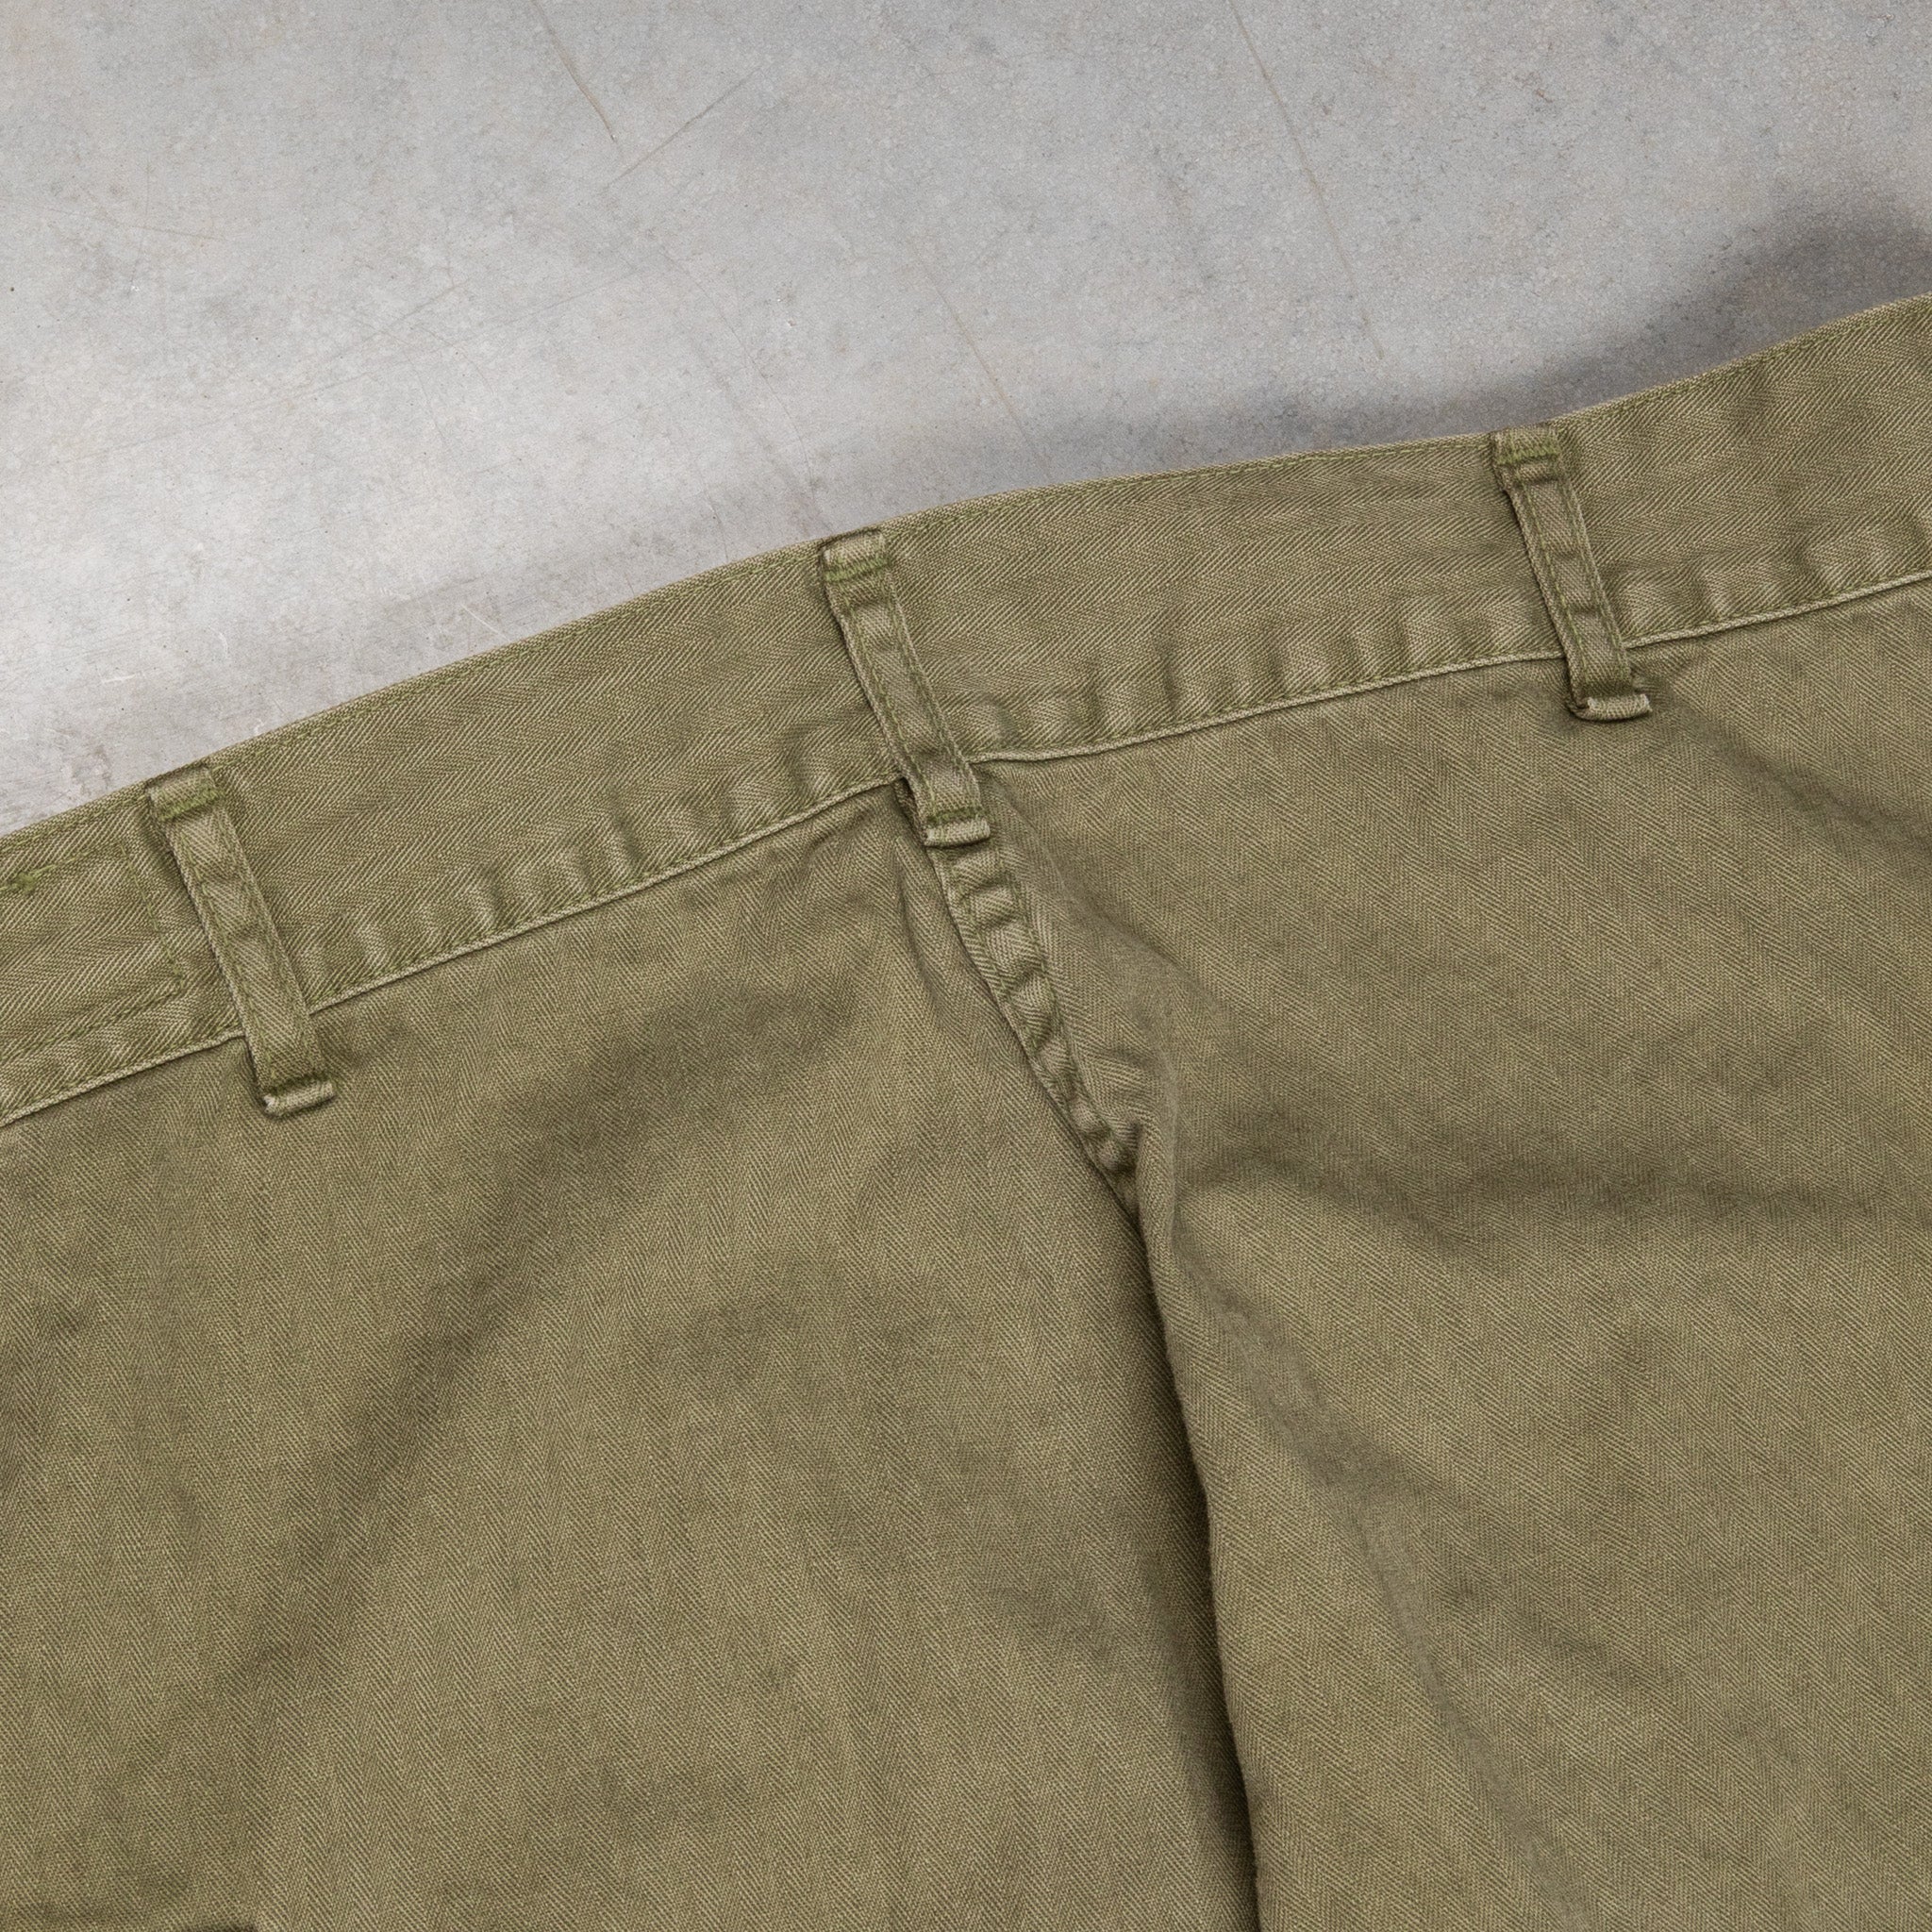 U.S Army 2 pockets Cargo pants Army Green – Frans Boone Store